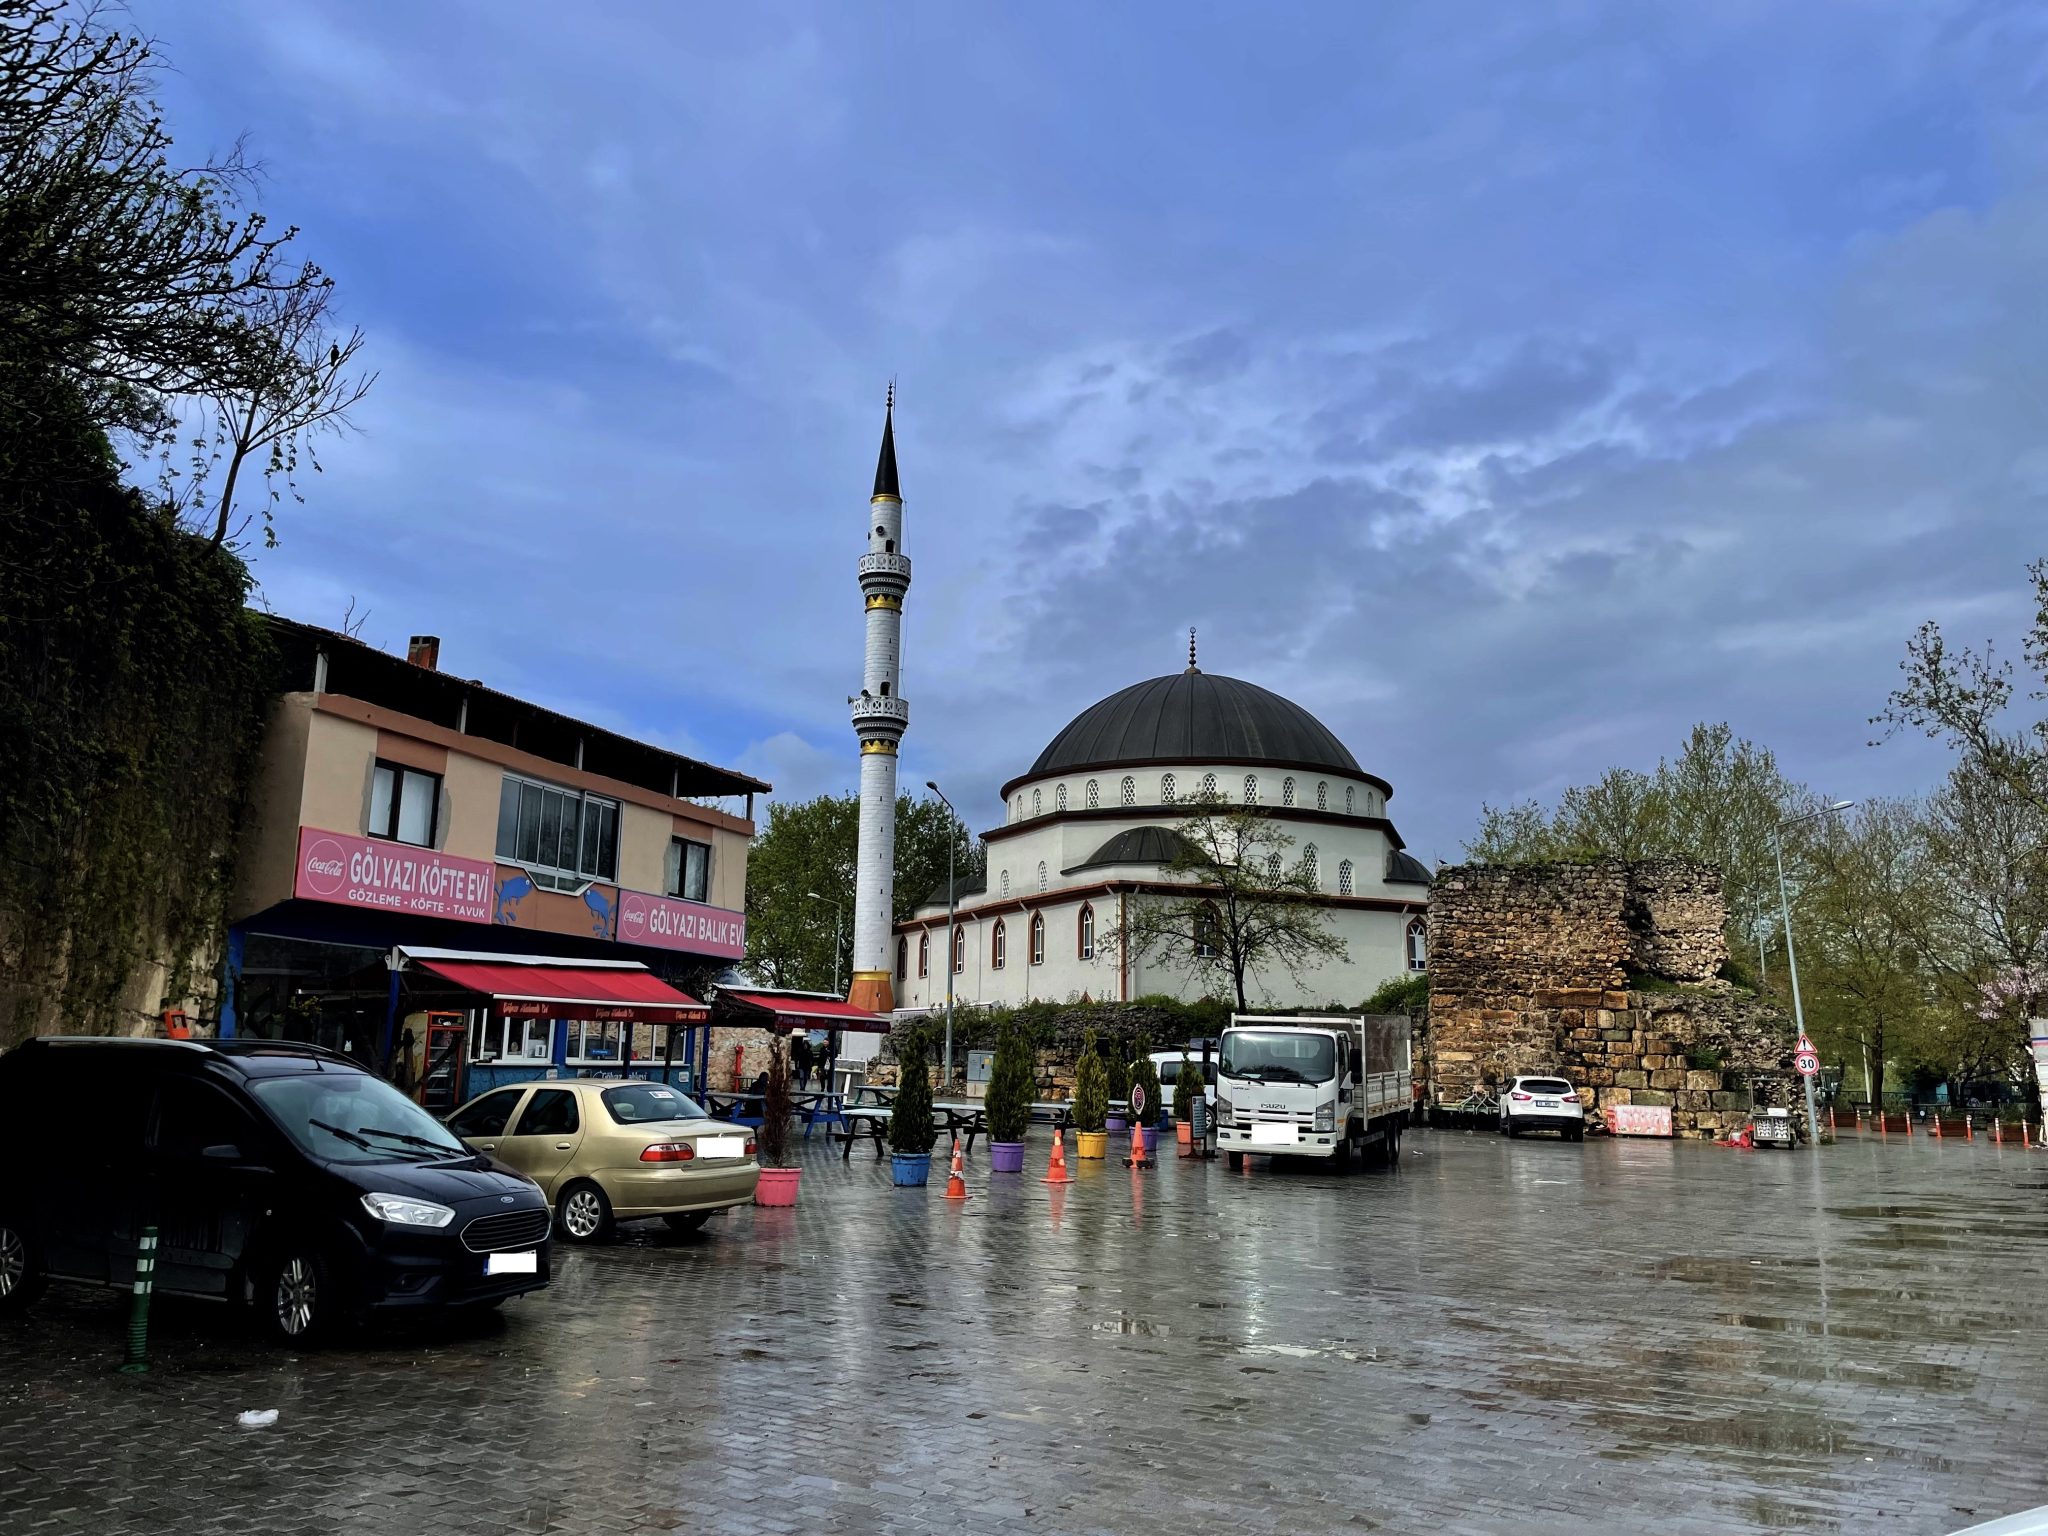 A breathtaking mosque graces the landscape in Turkey, framed by an exceptionally clear blue sky following a rainfall. Adjacent to it lie remnants of Roman architecture, a fascinating glimpse into the past.